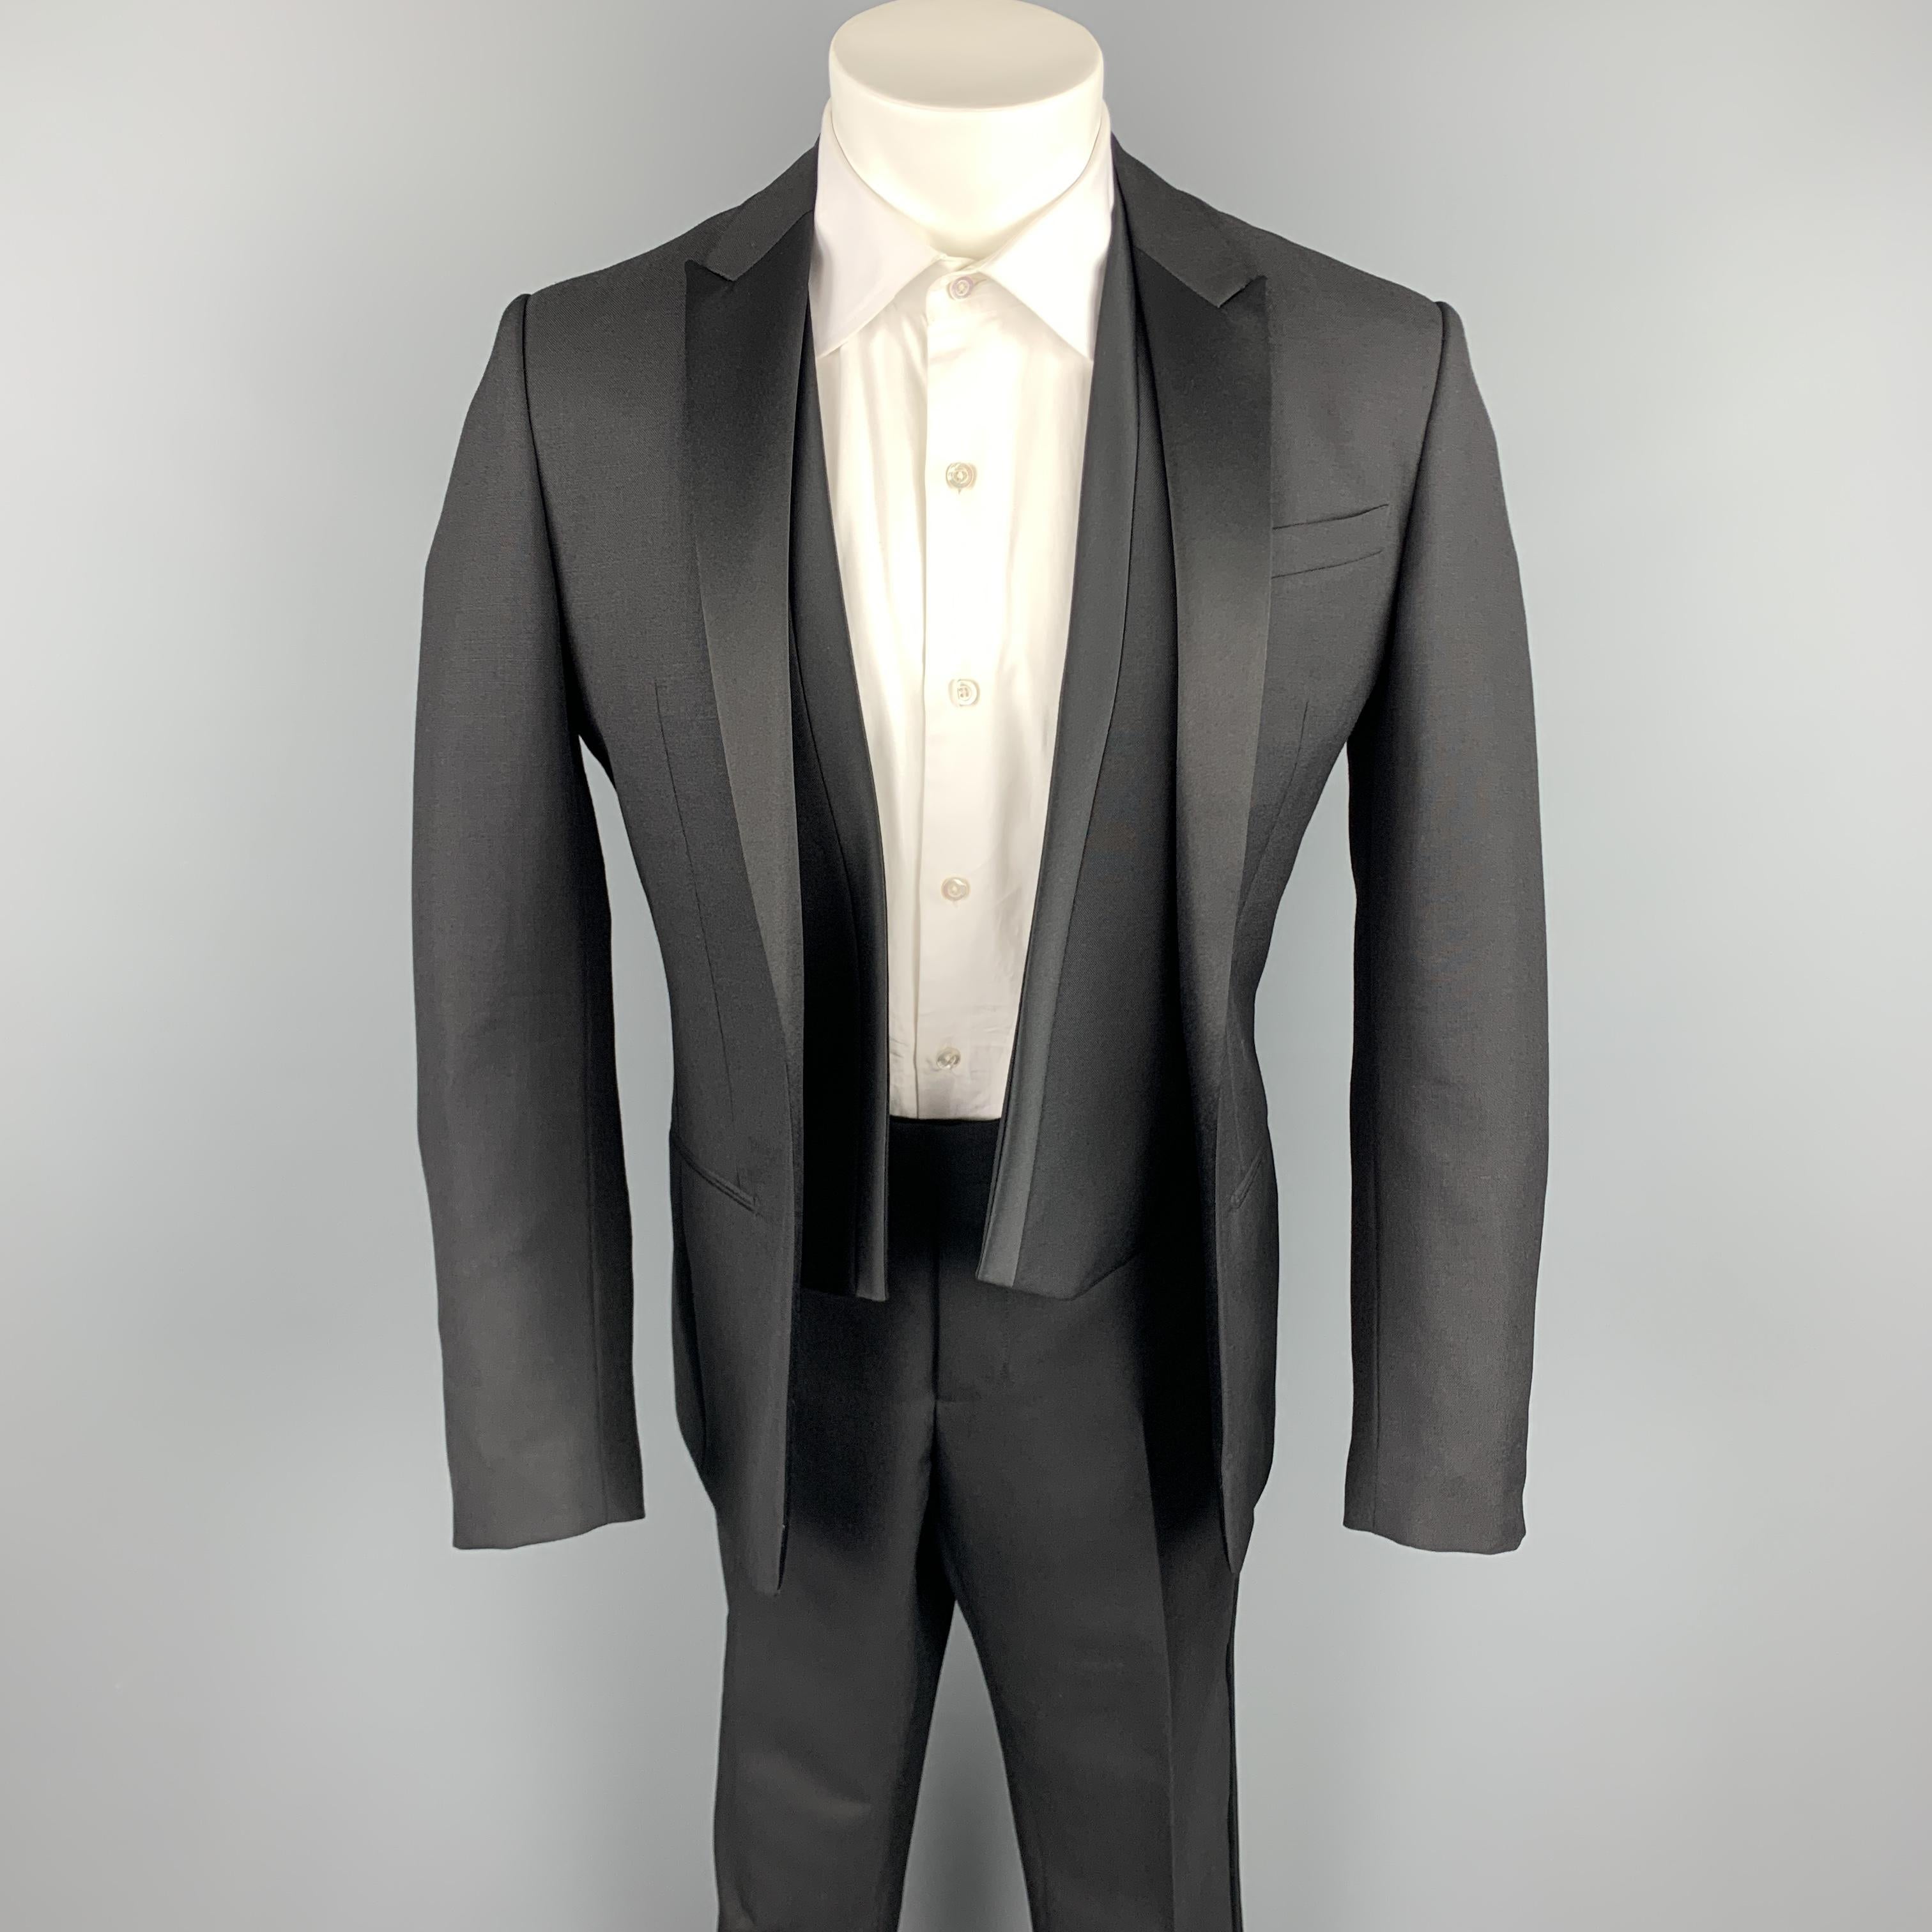 DIOR HOMME 3 Piece Tuxedo suit comes in a black wool / mohair and includes a open front sport coat with peak lapel and matching flat front trousers. Professional tailoring on suit read measurements. Made in Italy.

Excellent Pre-Owned